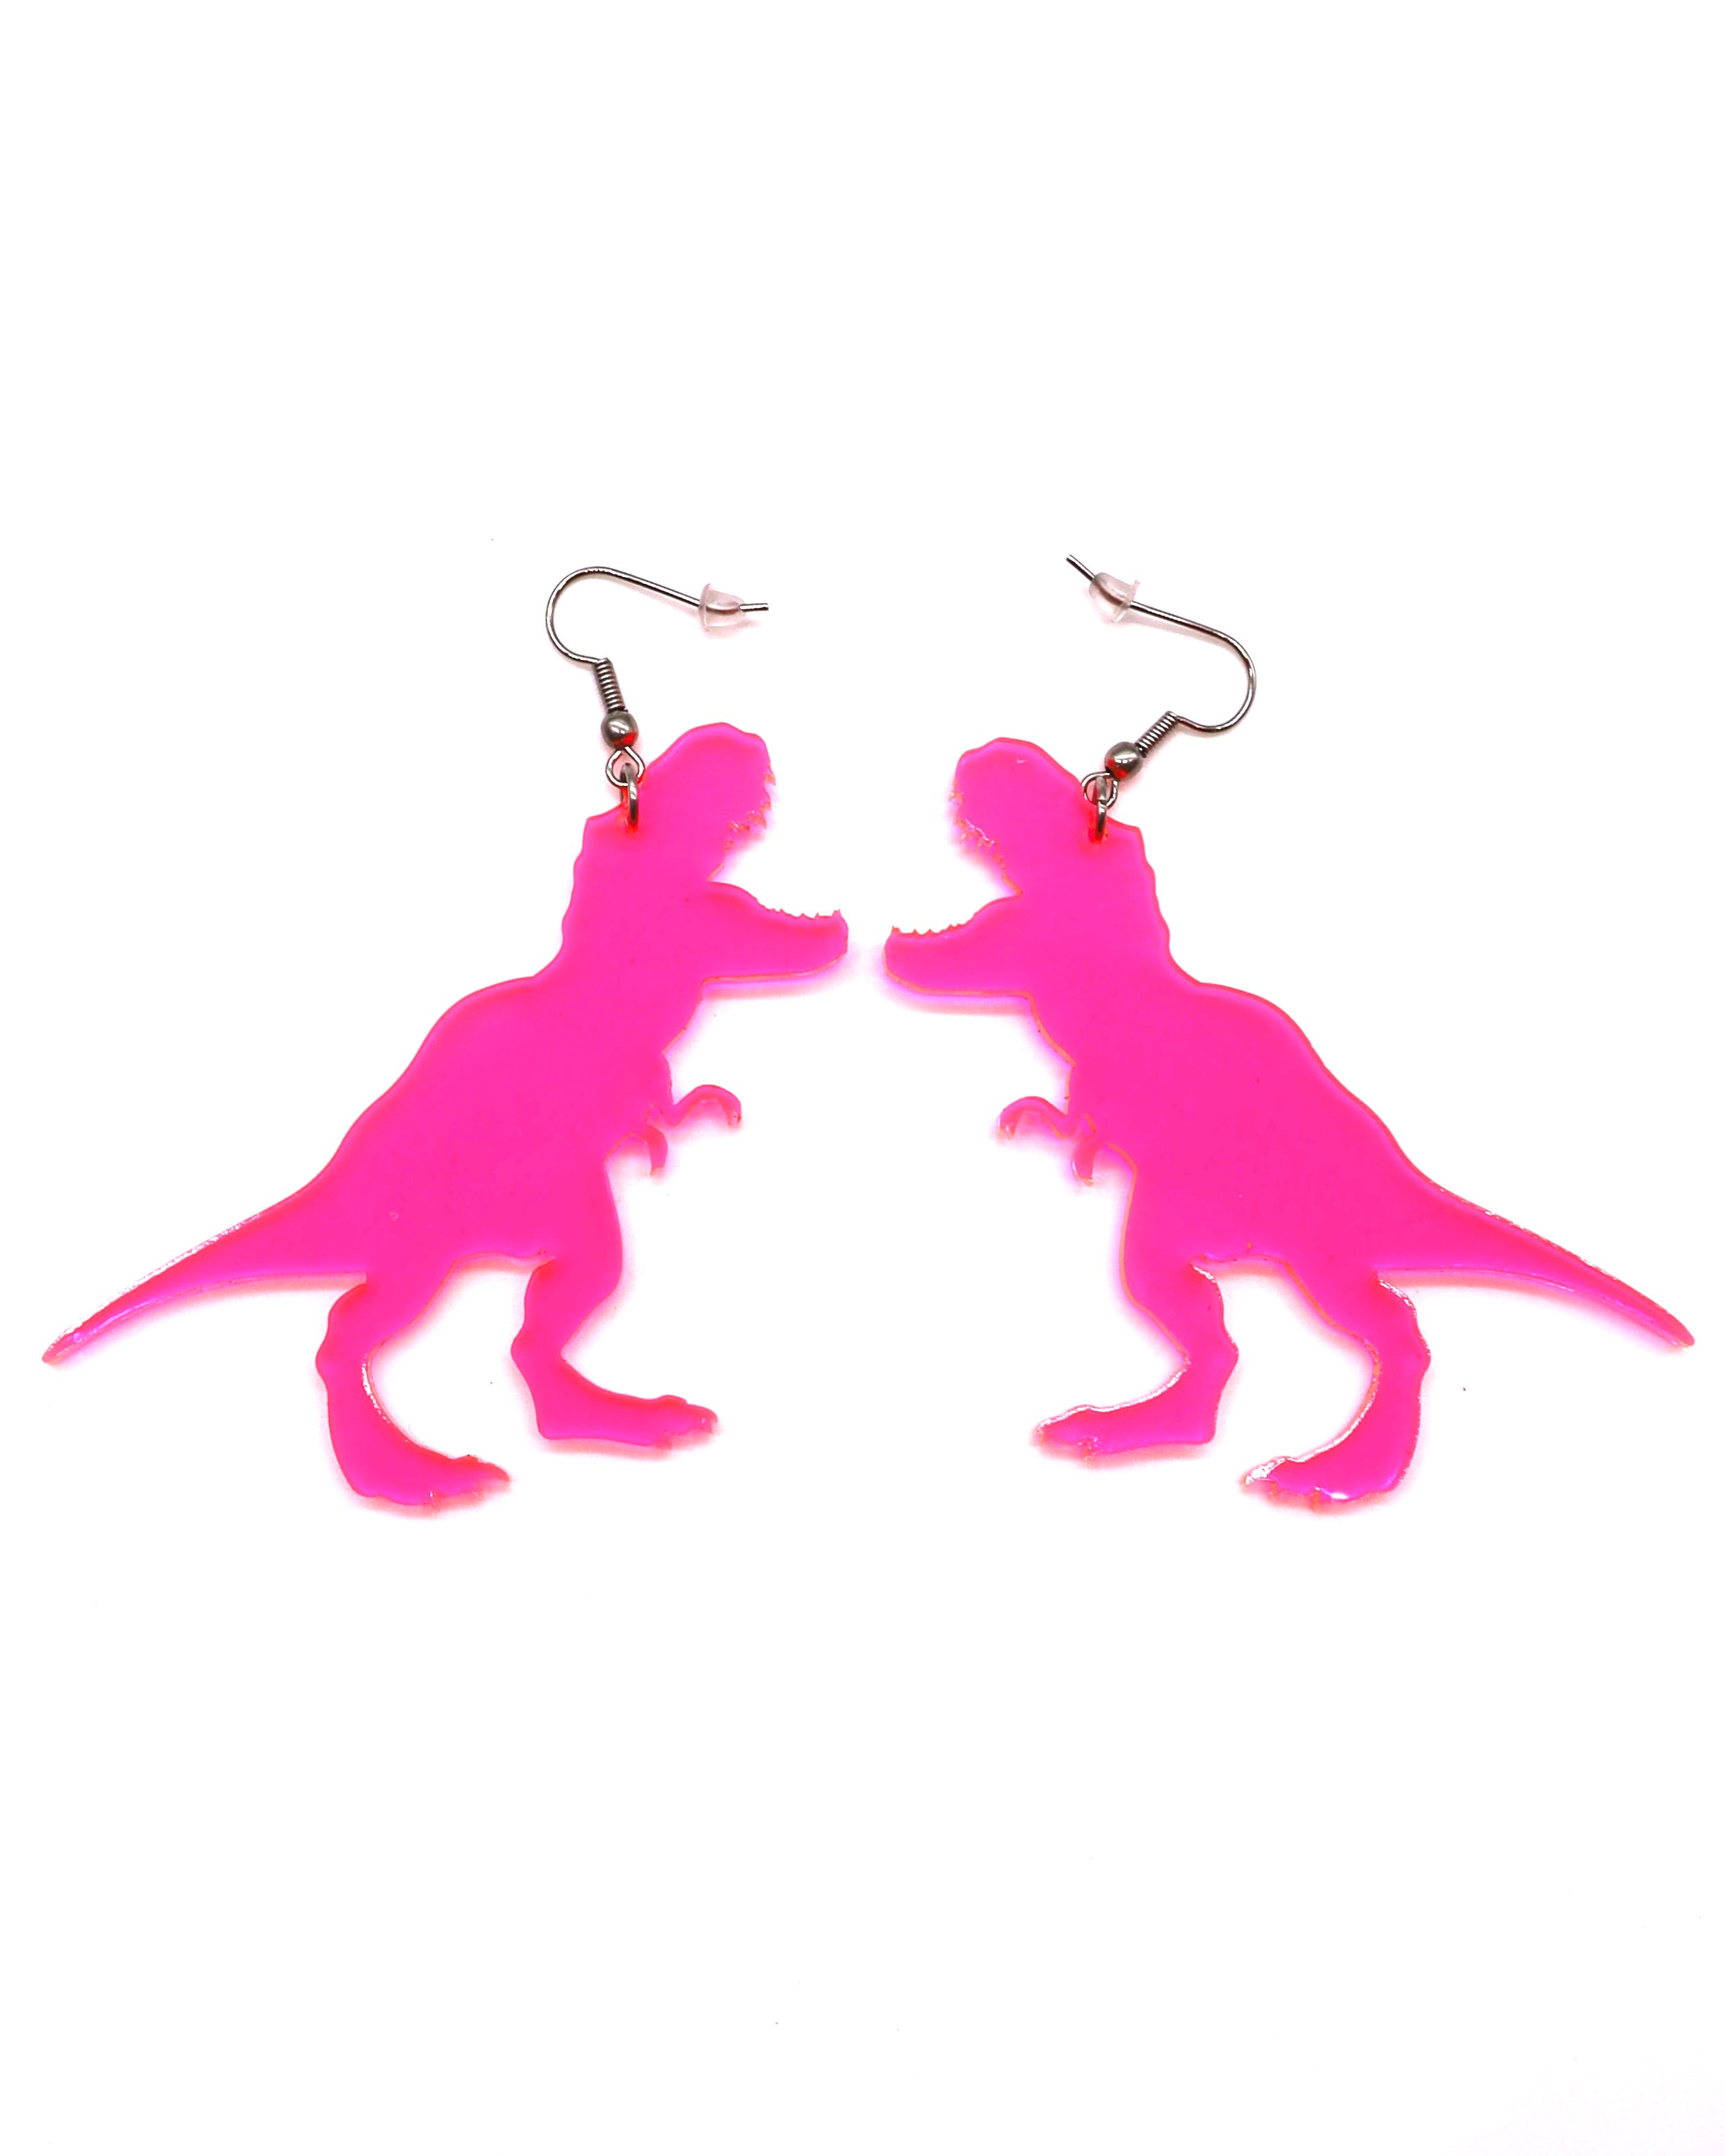 Close-up view of the T-Wrecked Earrings in fluorescent pink.